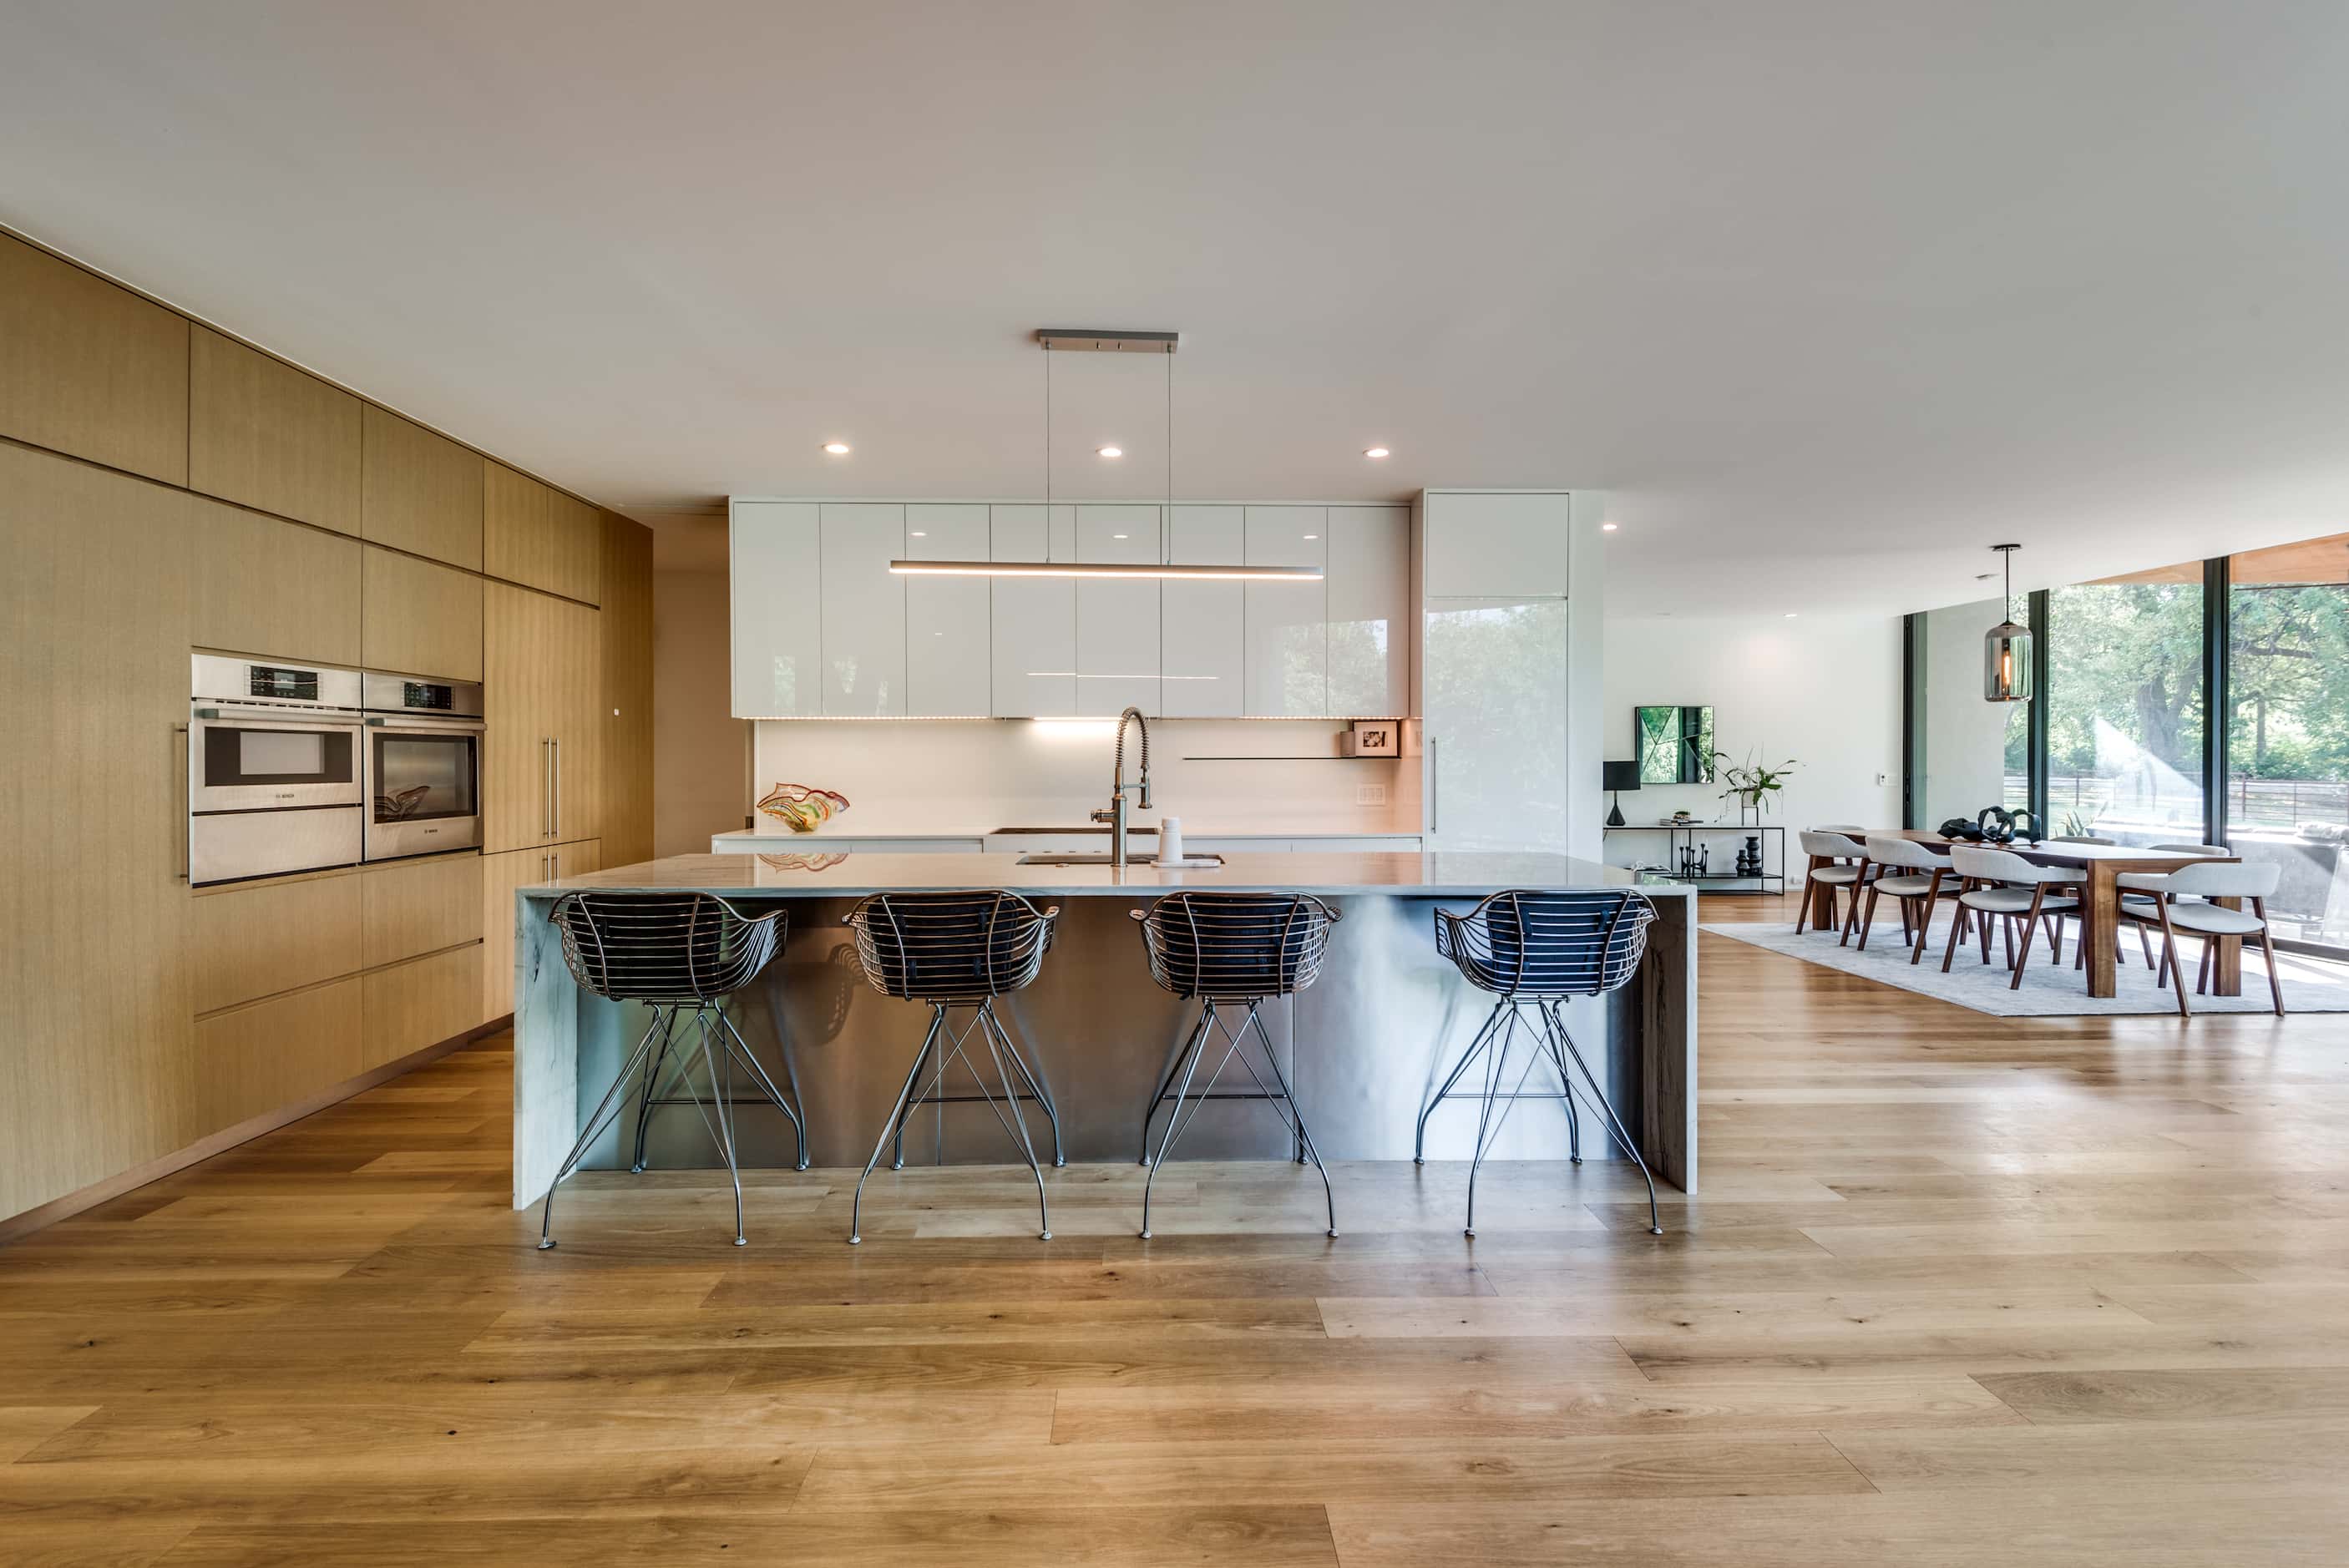 Interior of contemporary home, open-concept kitchen, countertop seating, wood cabinets